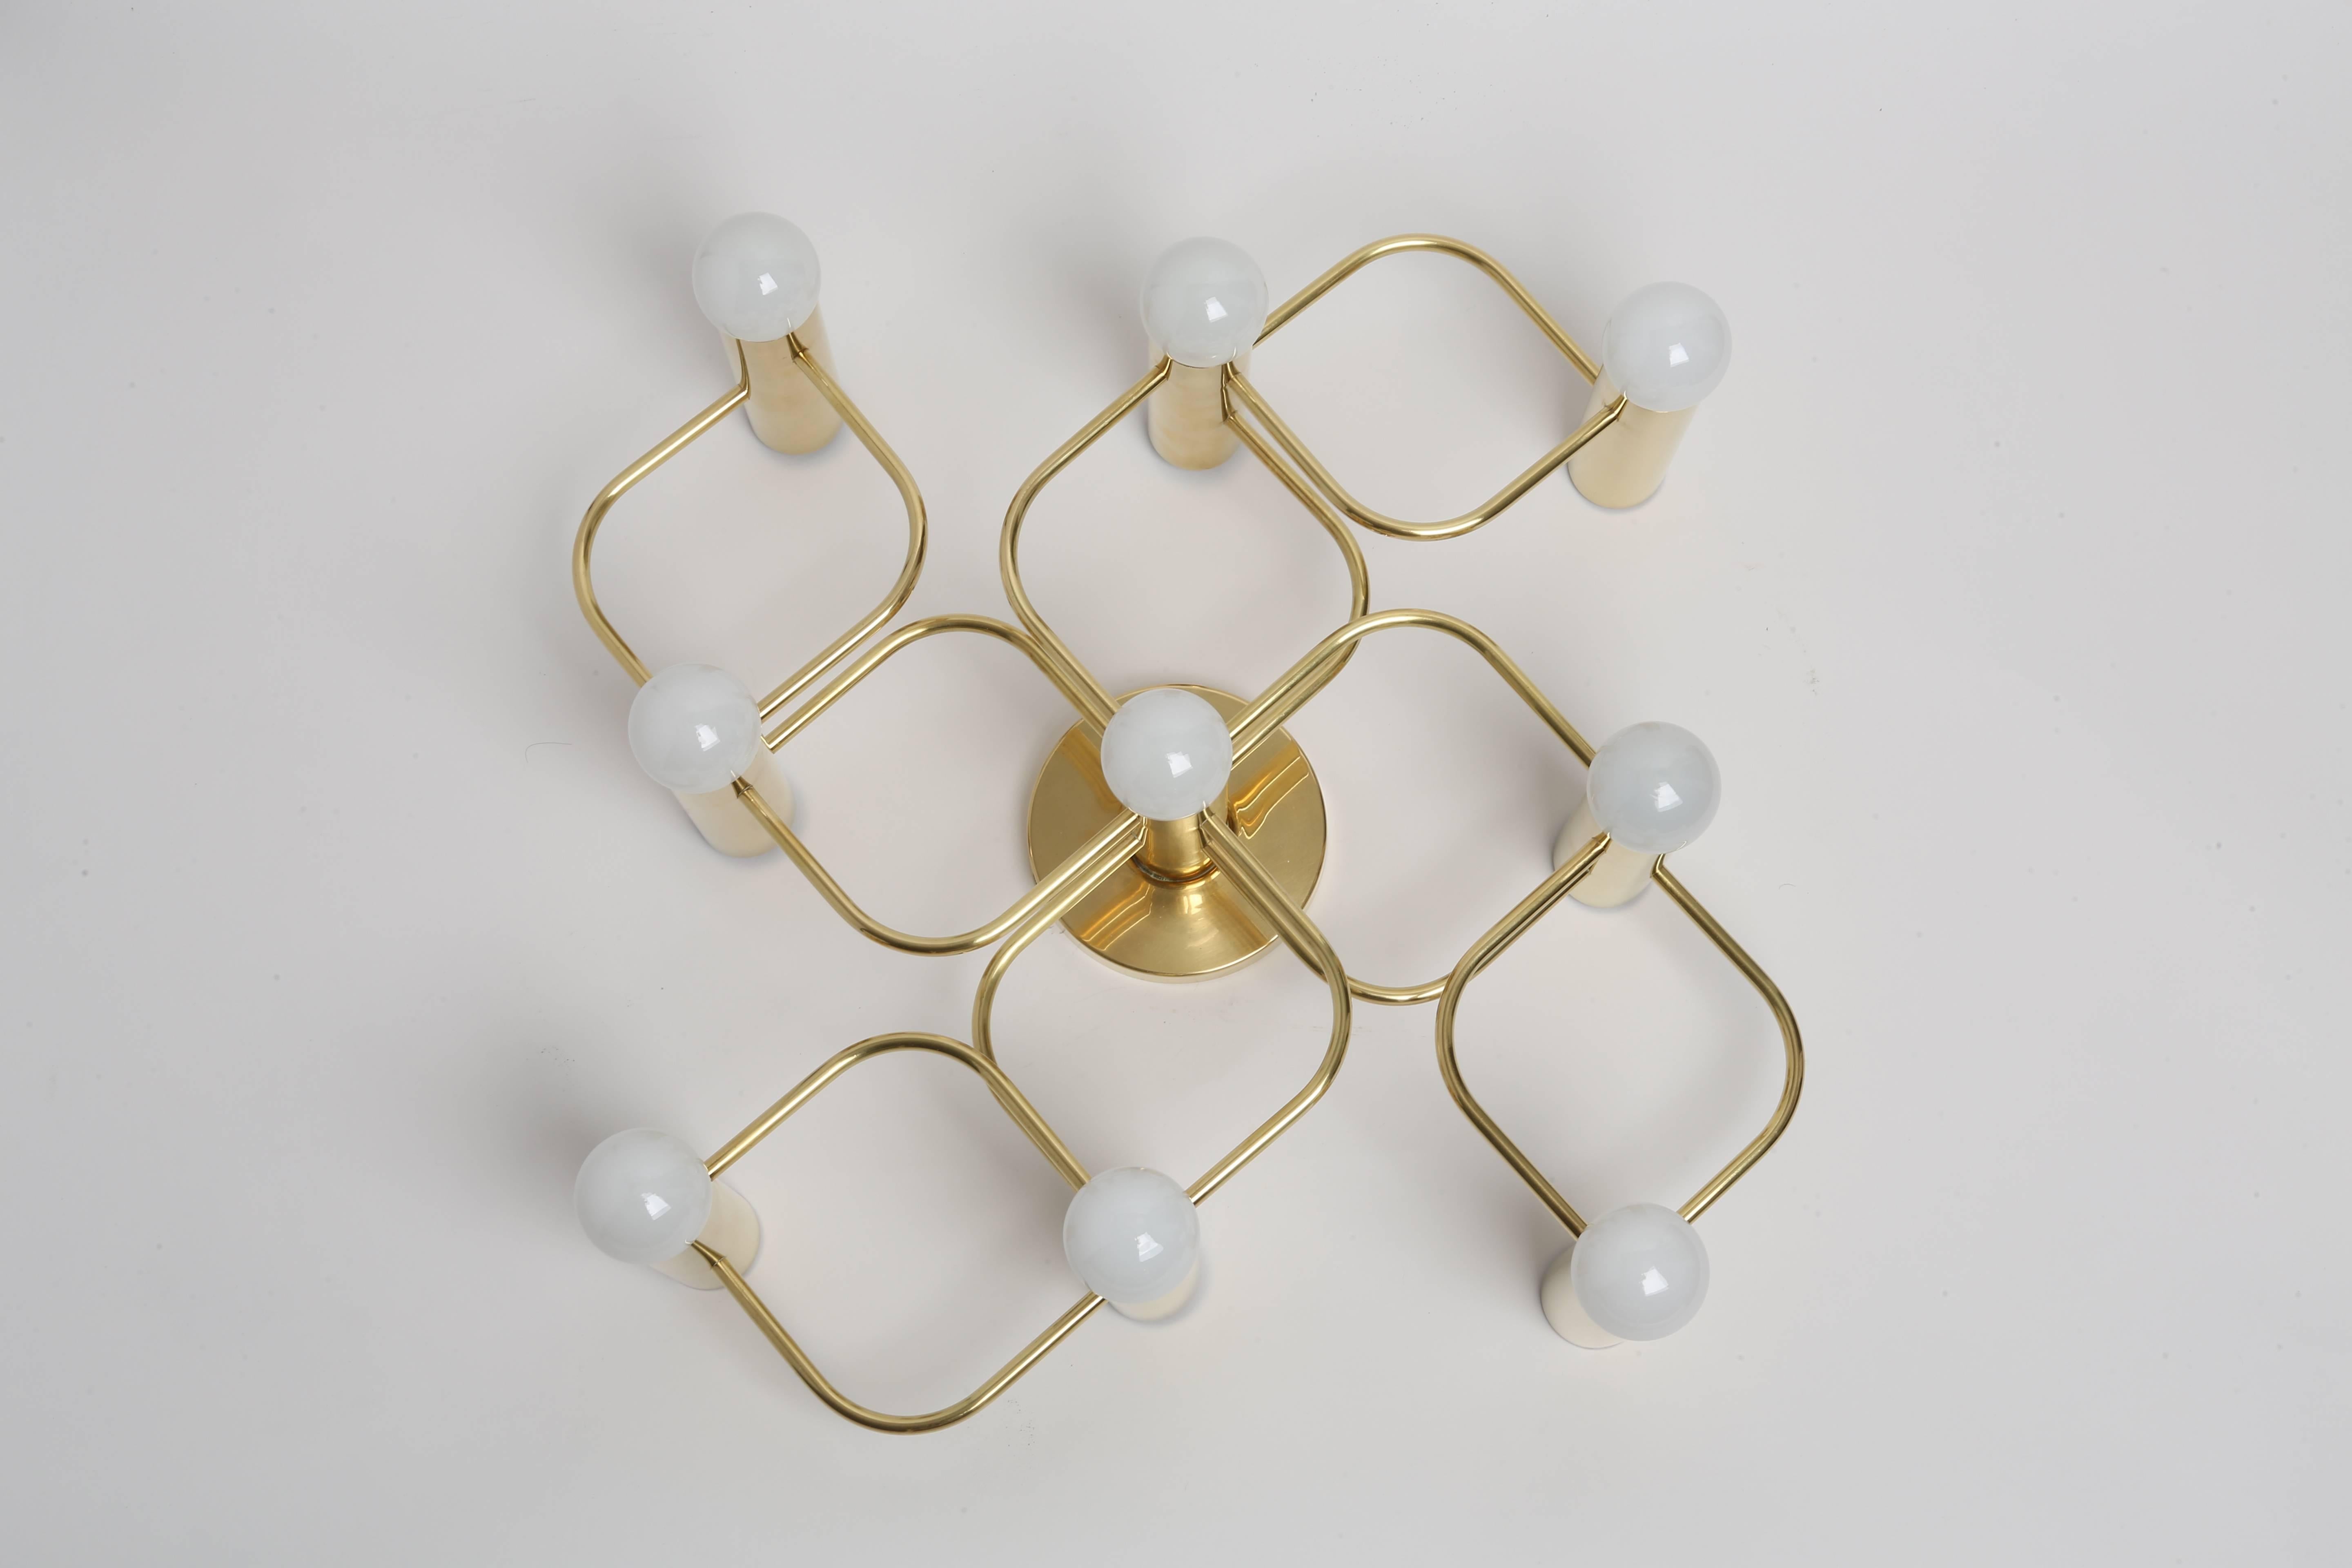 Sciolari style flush mount by Leola in polished brass.
Nine candelabra sockets. Can be used as either ceiling or wall light,
Germany, 1970s.